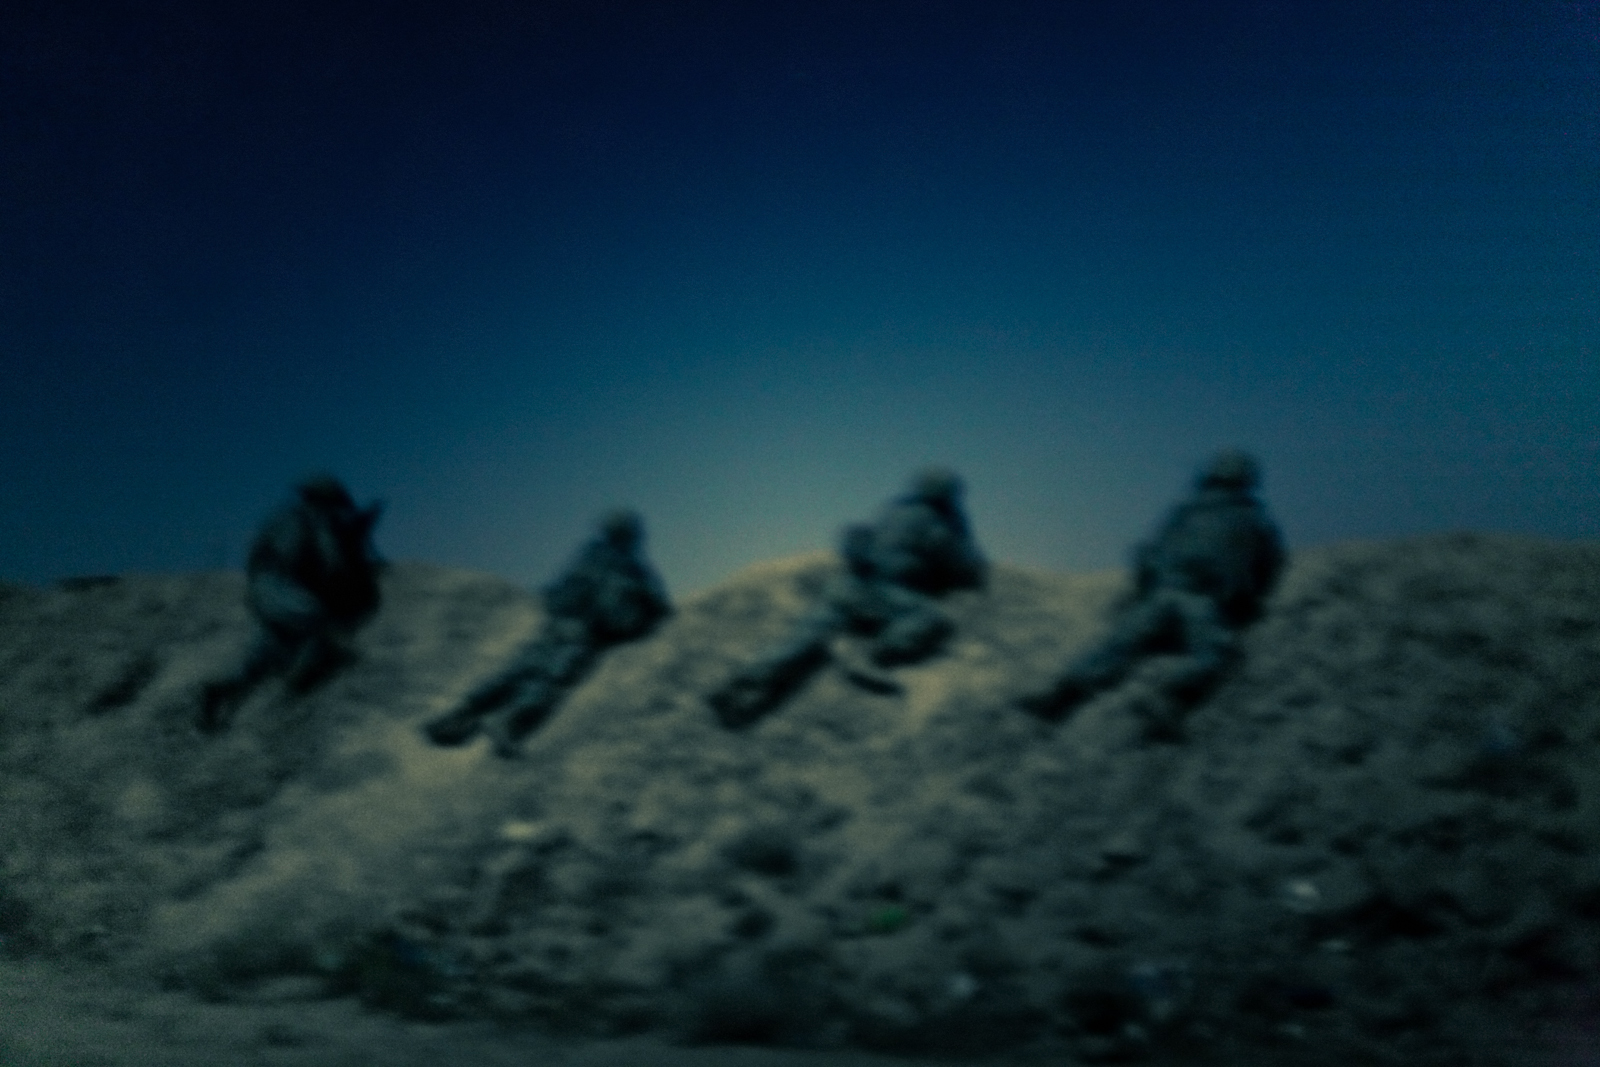 Soldiers from the 2nd Platoon 'Smash Platoon', 82nd Airborne Division, perform a target raid in Samarra, Salah ad Din province, Iraq, Sept, 28, 2007.